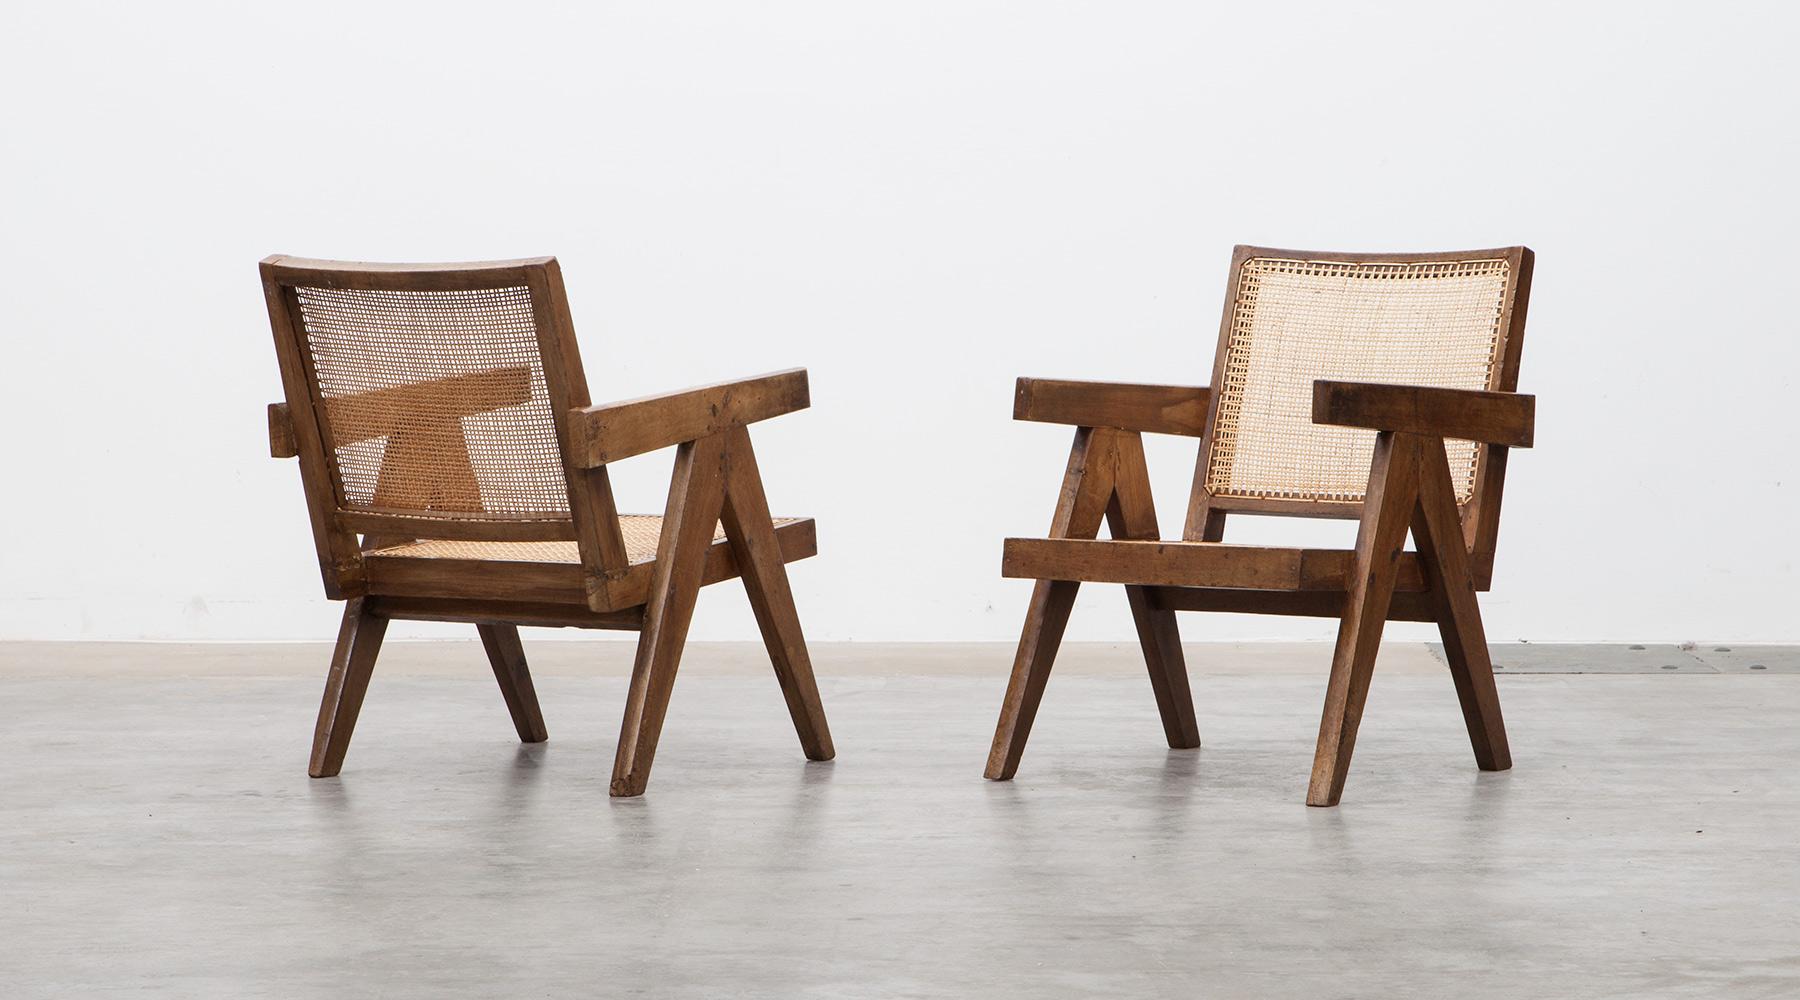 Pair of lounge chairs designed by Pierre Jeanneret in teak, Chandigarh, India, 1955

These original lounge chairs designed by Pierre Jeanneret in teak with woven cane on the seat and curved backrest appears in beautiful patina. Considering India